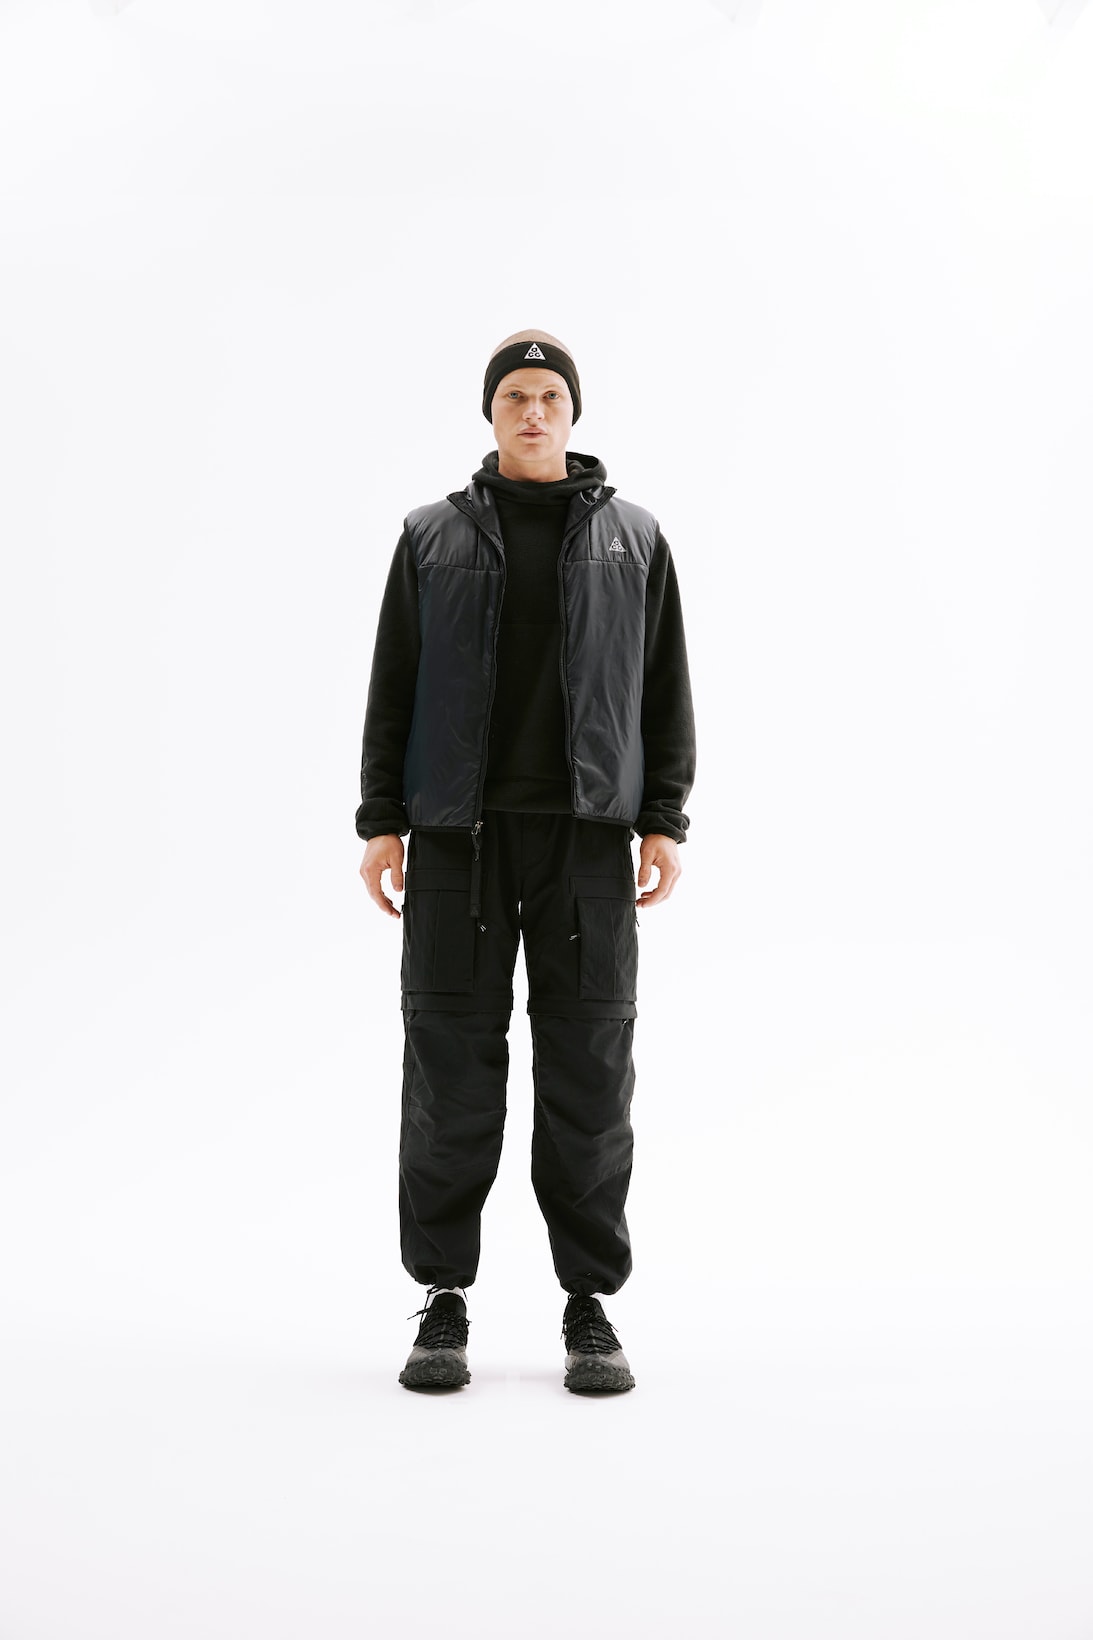 nike acg collection sivasdescalzo svd immersive virtual reality experience vest hoodie pants